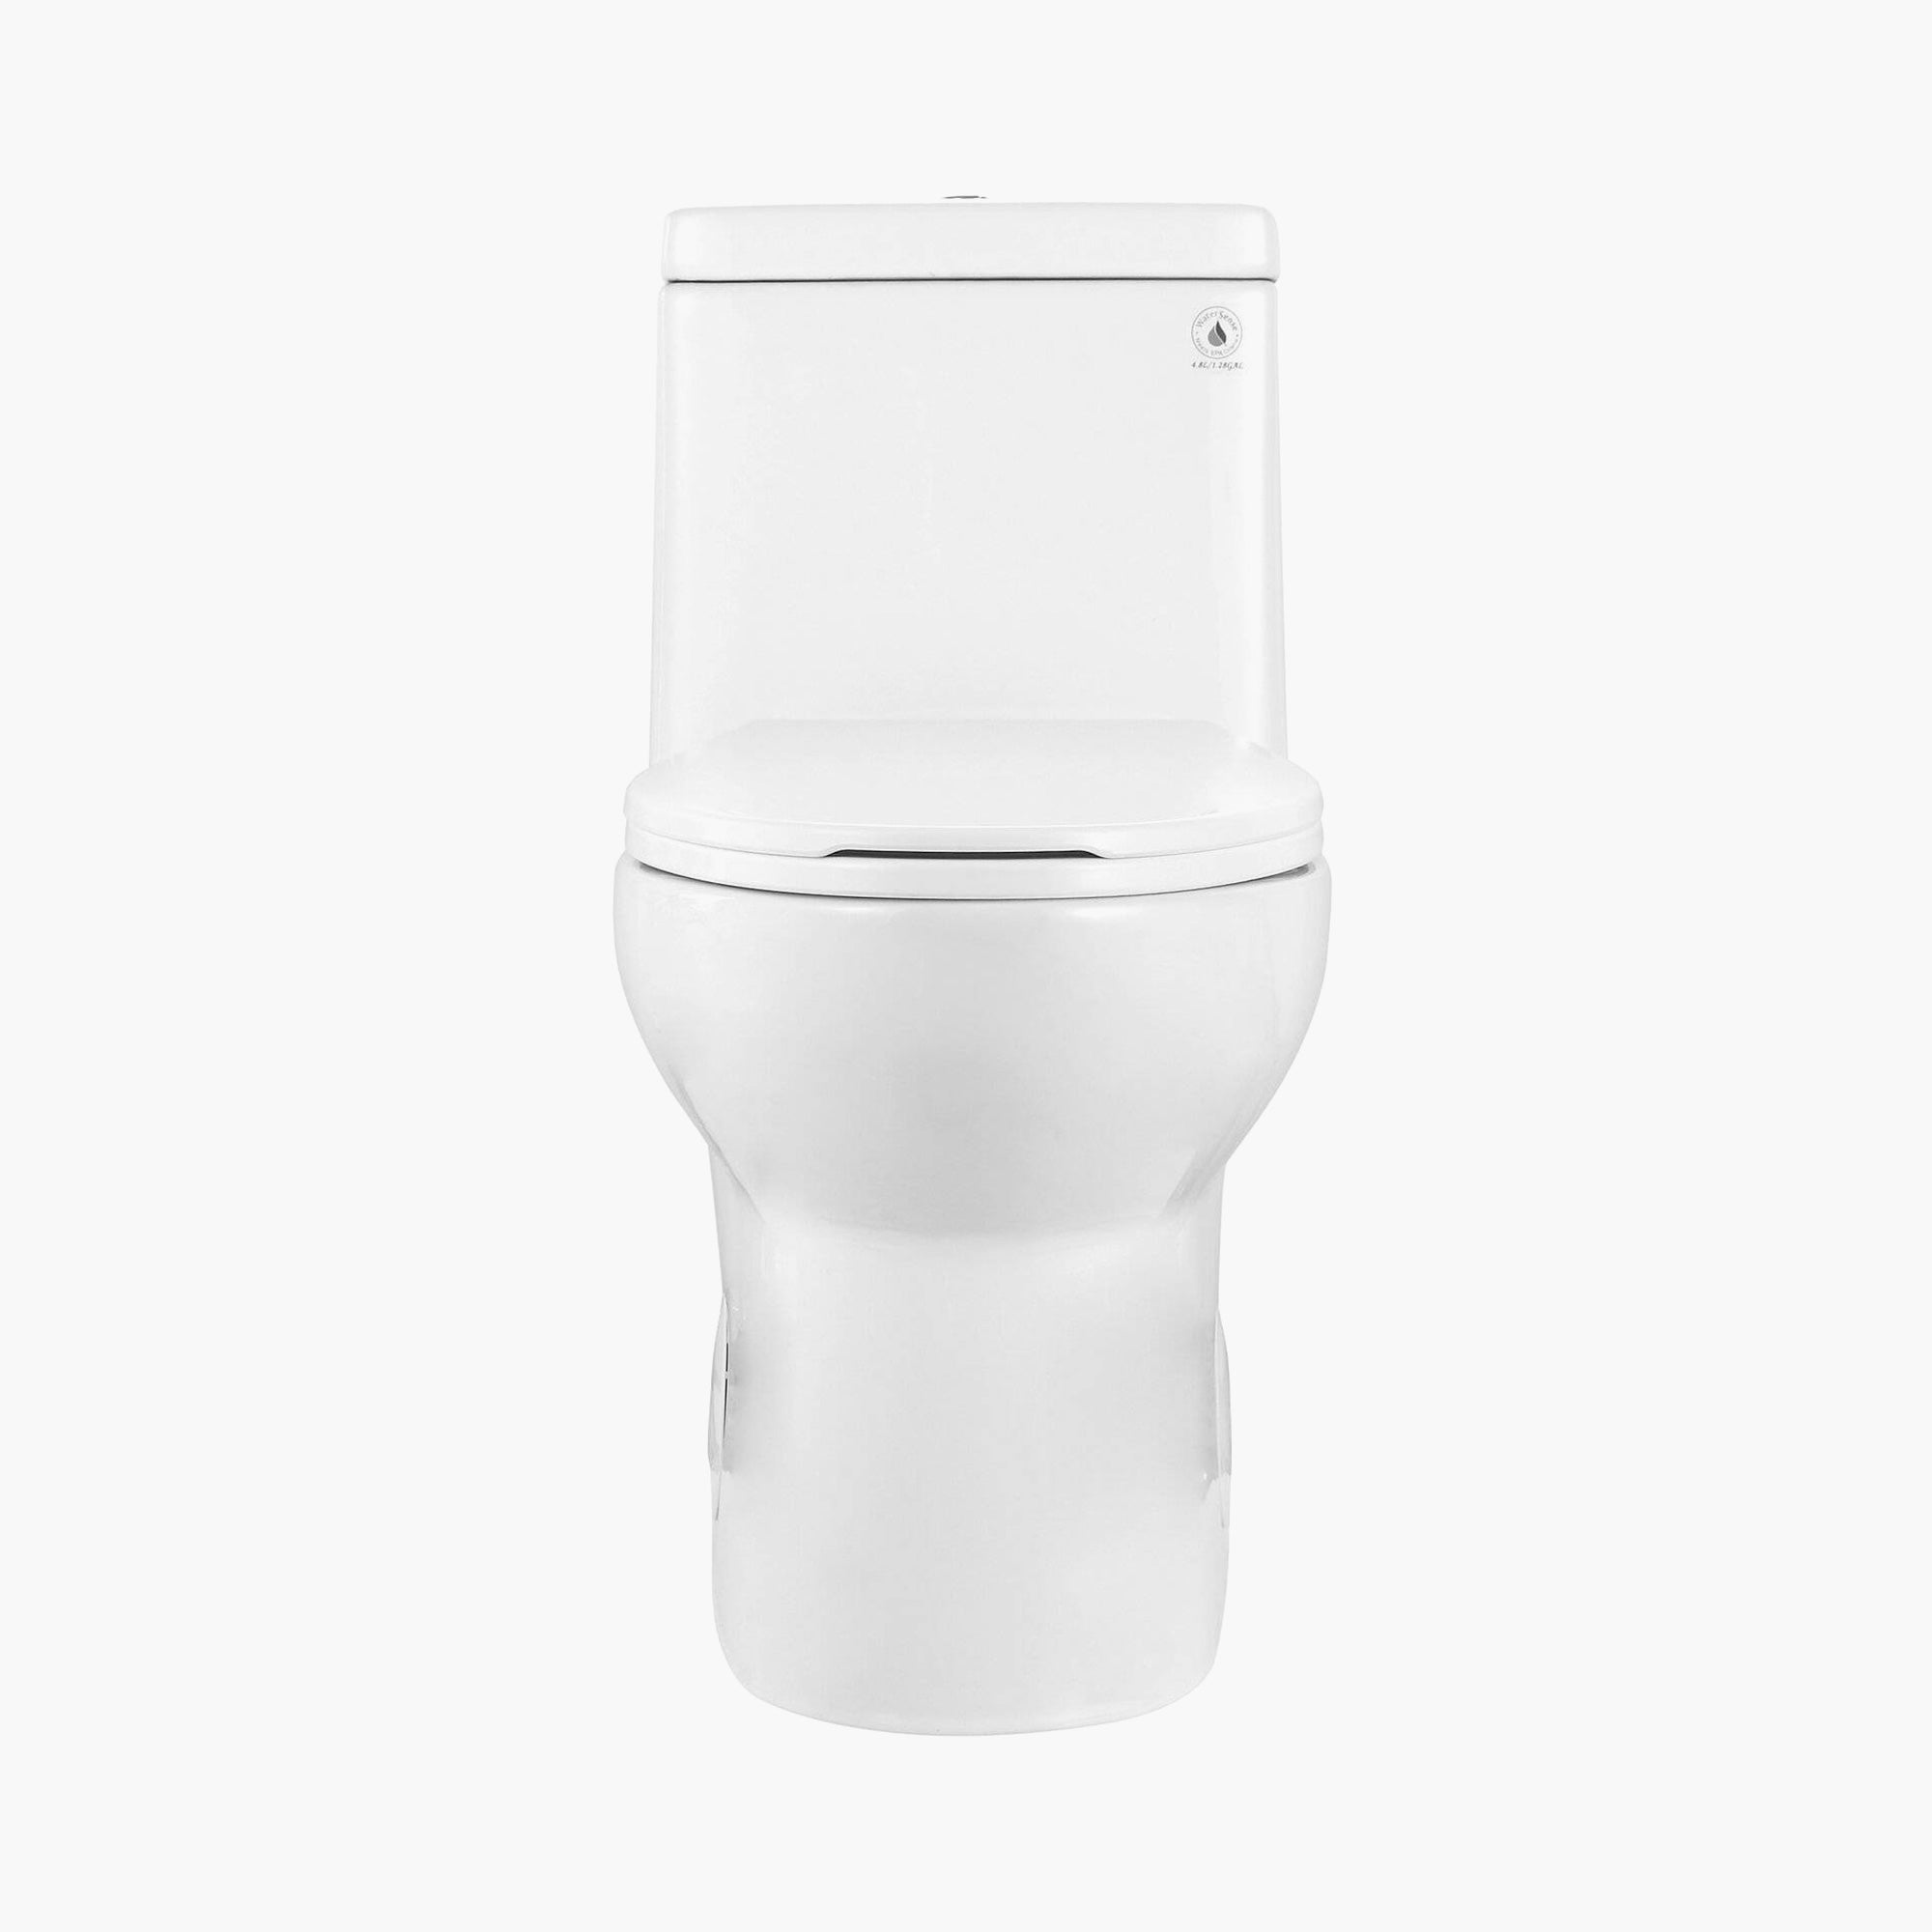 HOROW 12 Inch Rough In Toilet Dual Flush Elongated One Piece Toilet Model T0337W